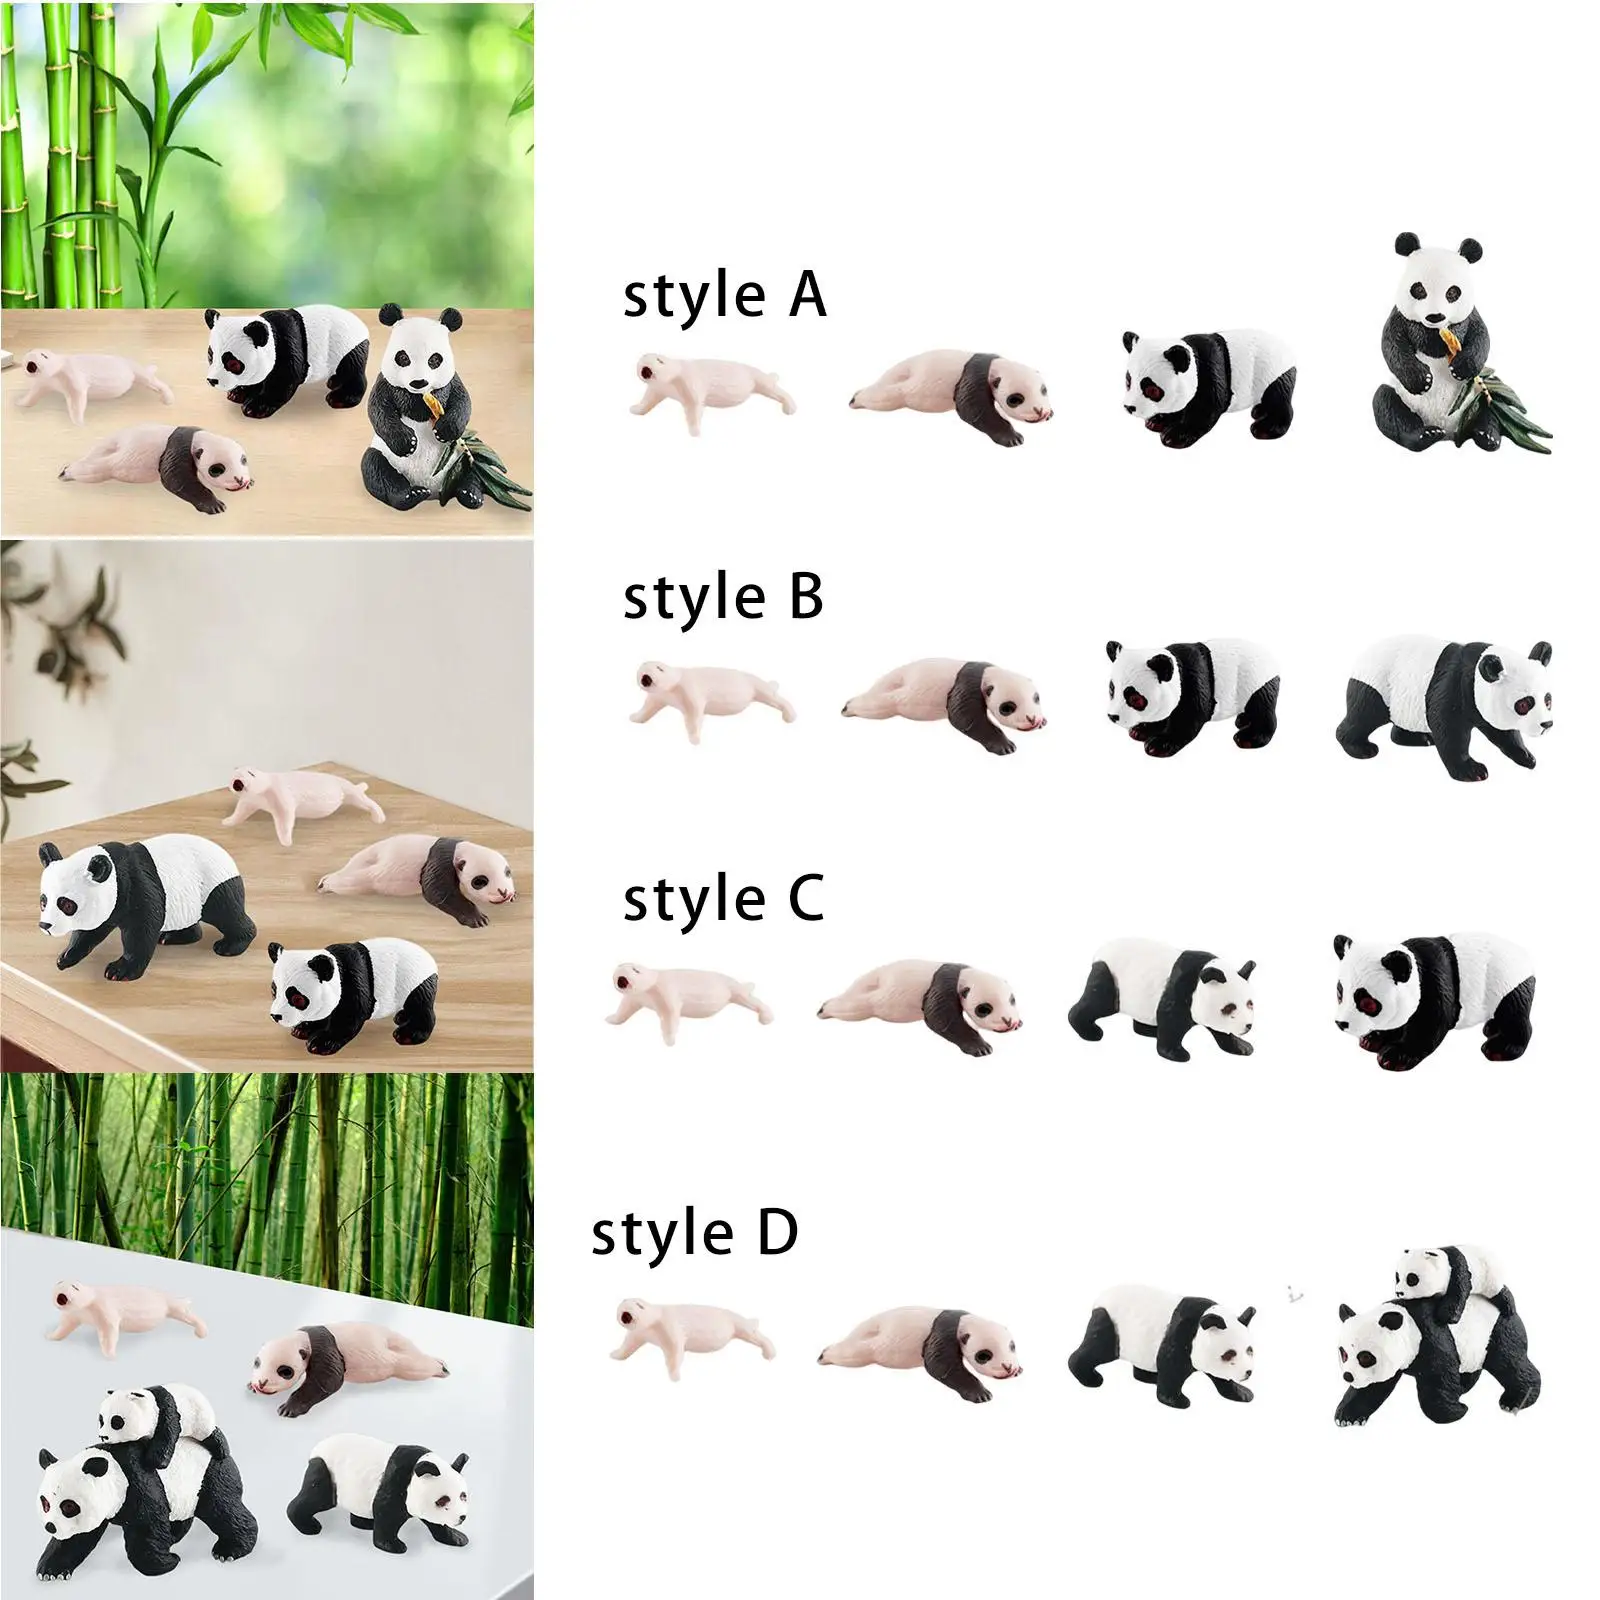 Realistic Animal Figurines Life Cycle Animal Figures Toy 4 Stages of Panda Animals Cognitive Playset Animal Growth Cycle Models